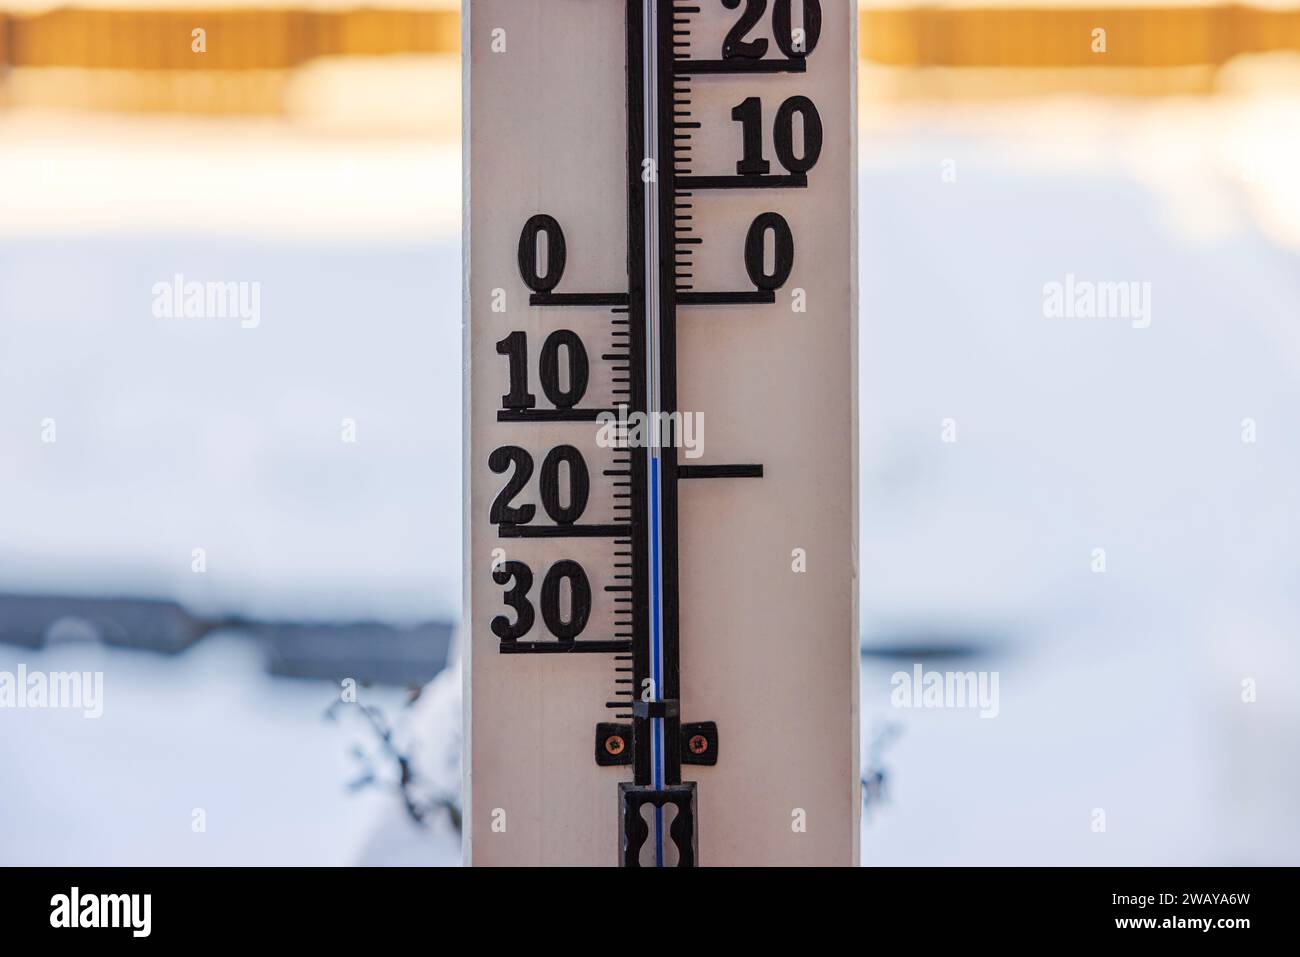 Close-up view of outdoor thermometer indicating minus 14 degrees Celsius. Stock Photo